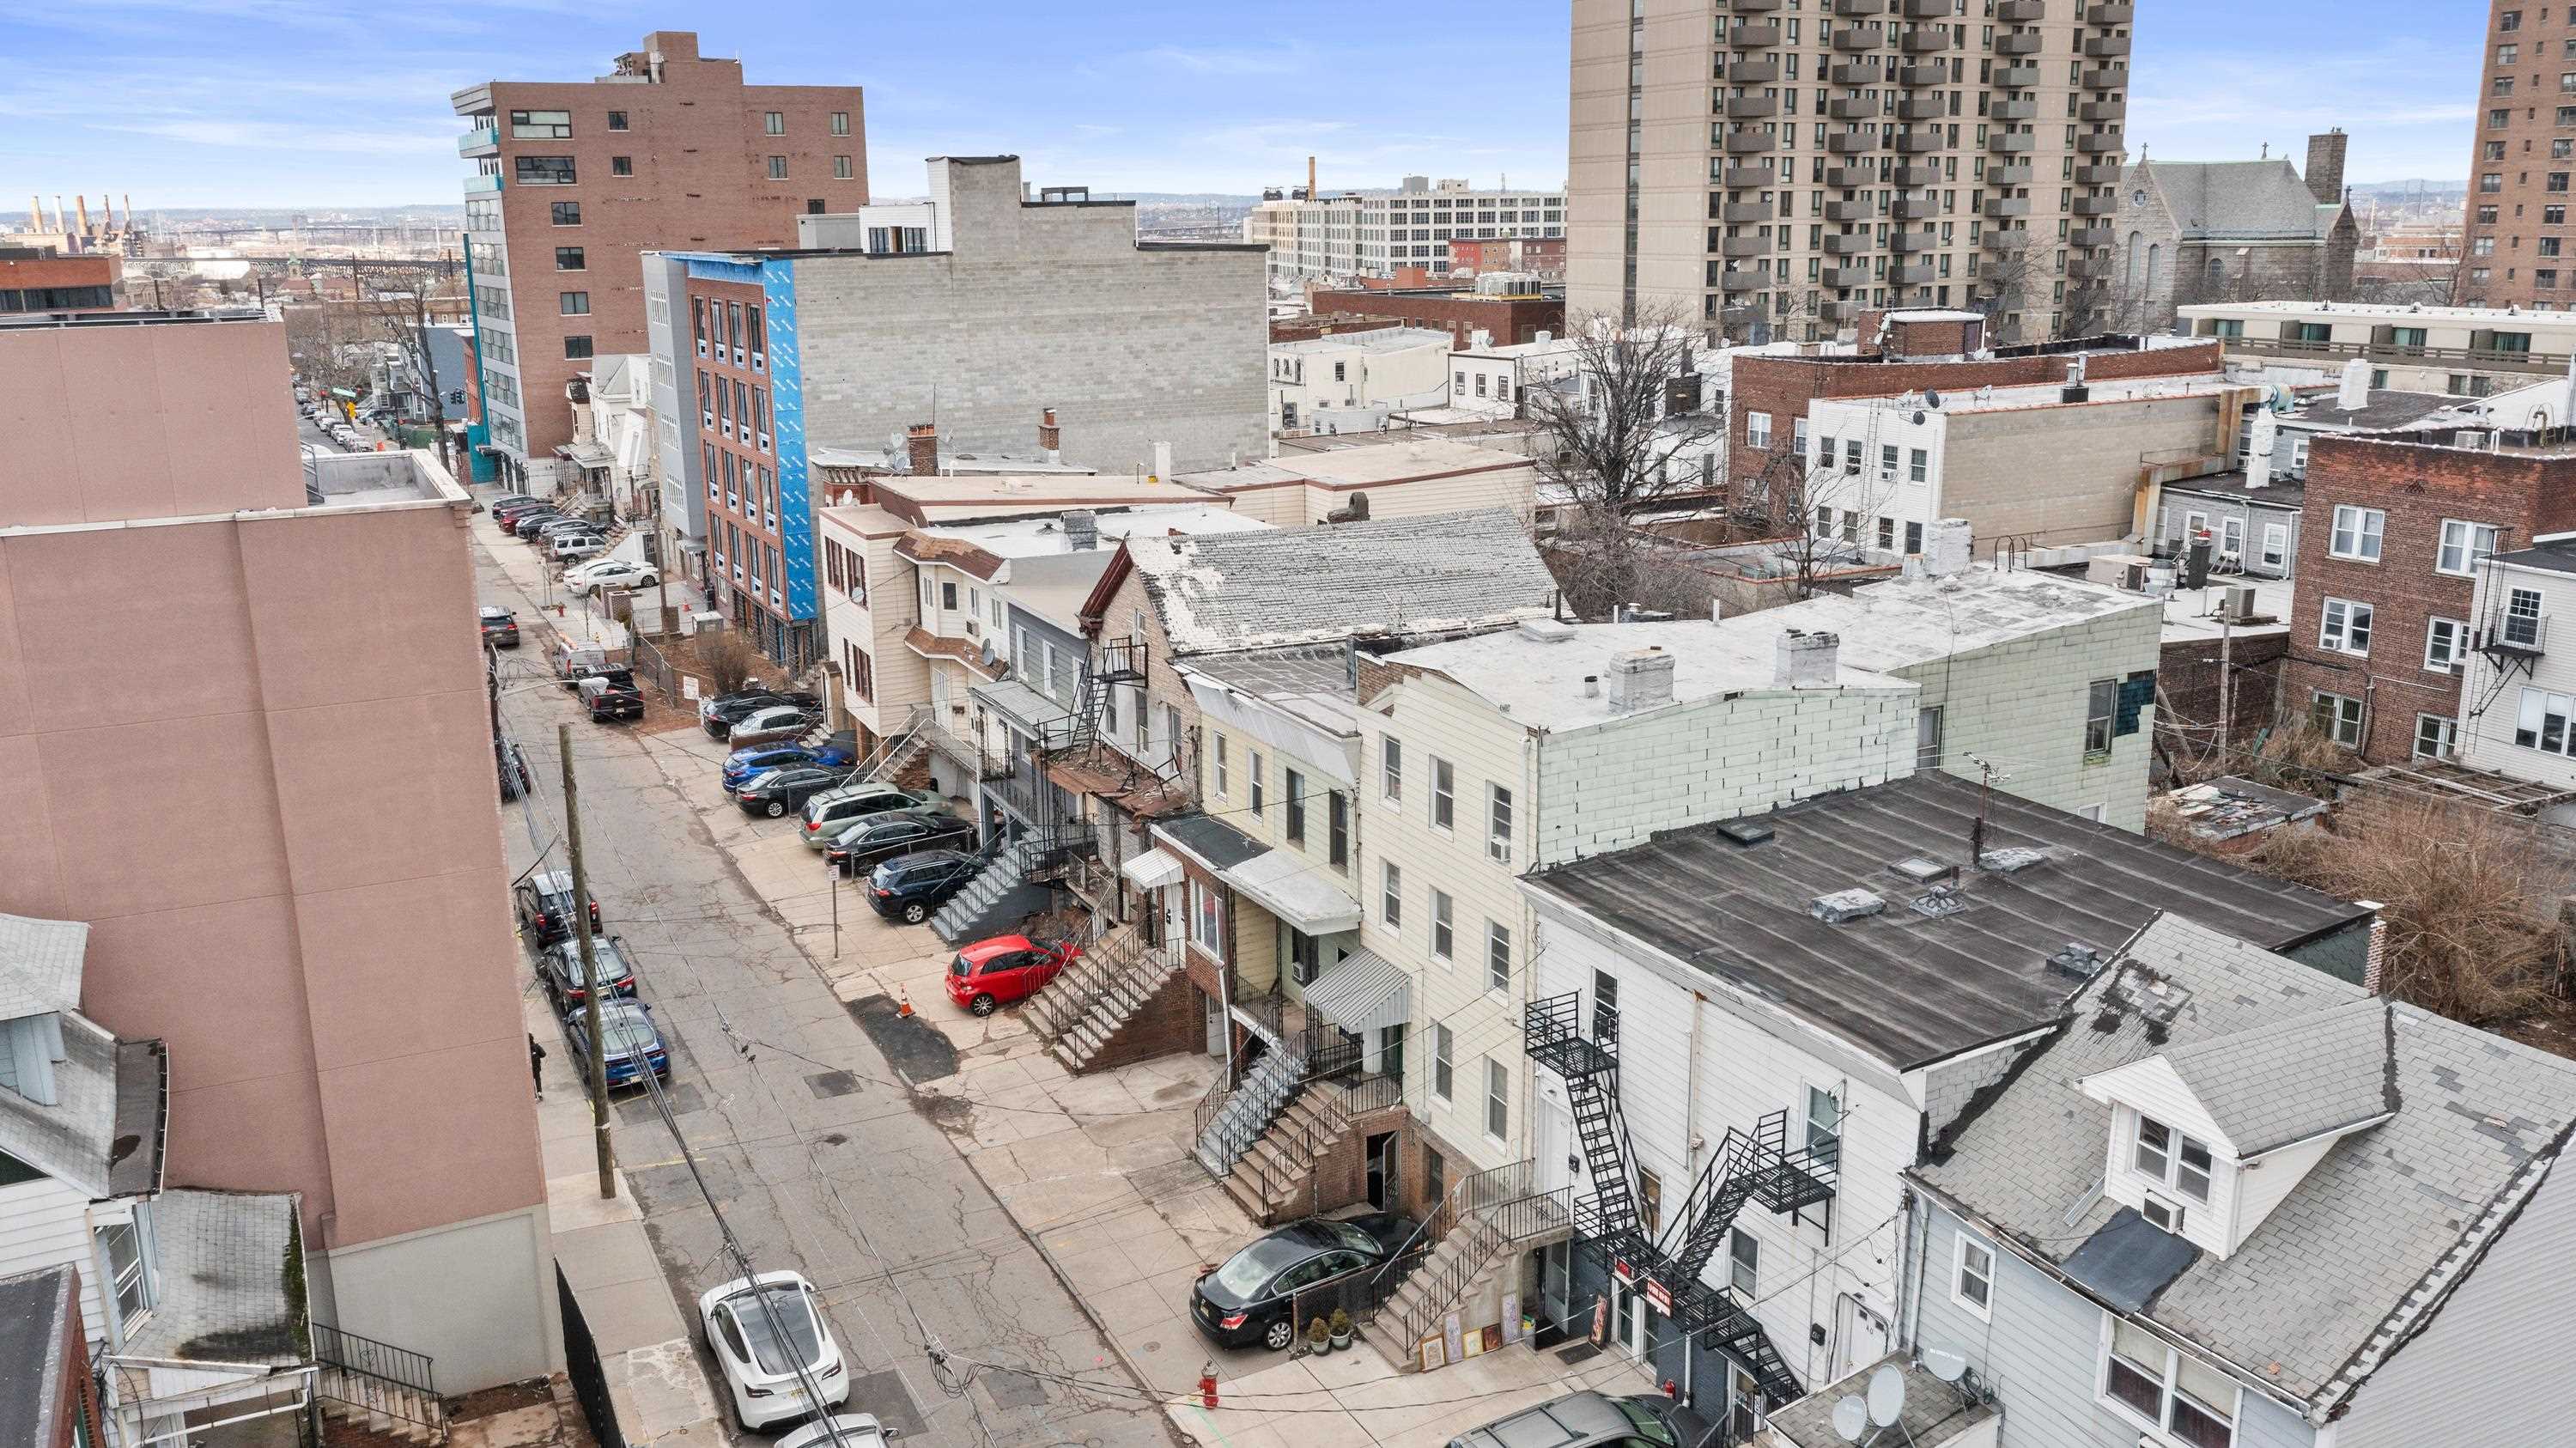 EXP Realty has been exclusively retained by Ownership to offer for sale their fee simple interest in 42, 44, 44A and 46 Cottage Street properties, an assemblage that took 7 years to combine, consisting of 9,052 square feet of land, in the 2060 Redevelopment Zone 4 of Journal Square, the highest redeveloping area of Jersey City, Hudson County, New Jersey, which is also strategically located in an Opportunity Zone.  The land currently hosts one to two family housing, three of the four properties are currently rented and will be delivered vacant at closing. The houses do not posses any historic significance and can be fully demolished to build new contemporary building. As per the site analysis study conducted by Anthony C. Vandermark, the Principal Architect at MVMK Architecture & Design, the site is zoned for 6 stories / 64’ – 00”, As of Right Residential Project, 46,125 SQFT Constructible and 38,438 SQFT Sellable / Rentable. 50-54 Units with Studios. Site Area qualifies for Zone 4 Office Bonus of 2 Additional floor. No parking being provided which is permitted. *Optional 9th floor could be approved at 101’-08” in height with 10% affordable provided. 9 Story Structure will be classified as a High-rise with Related Code Requirements.”  Site is currently surrounded by tons of Restaurants, Café, Supermarkets, Banks, Hospitals and Corporate Offices. Its conveniently located steps from Homestead Place, a new walkway extension of Homestead Place which has lead to 7, 20 – 27 story high-rise buildings with an influx of over 2000 new construction units.  The gentrifying neighborhood is evident by the new construction residential and mixed use projects surrounding the site. The upcoming Homestead Place Pedestrian Plaza will house many new cafe, restaurants, office and retail spaces surrounding the area, a street referred most commonly as being similar to Stone Street in Manhattan’s Financial District. A quick 5-minute walk from the site provides access to the Journal Square Path Train, # 1 transportation hub in Jersey City, and arrive New York City within sixteen minutes via the Path train.   In addition, the site provides quick access to Newark Airport, JFK Airport and LaGuardia Airport via major roadways such as Route 1, Route 9, and I-78.  Two One Two, Eight Four Four, Nine Three Nine Three, for all questions or appointments.